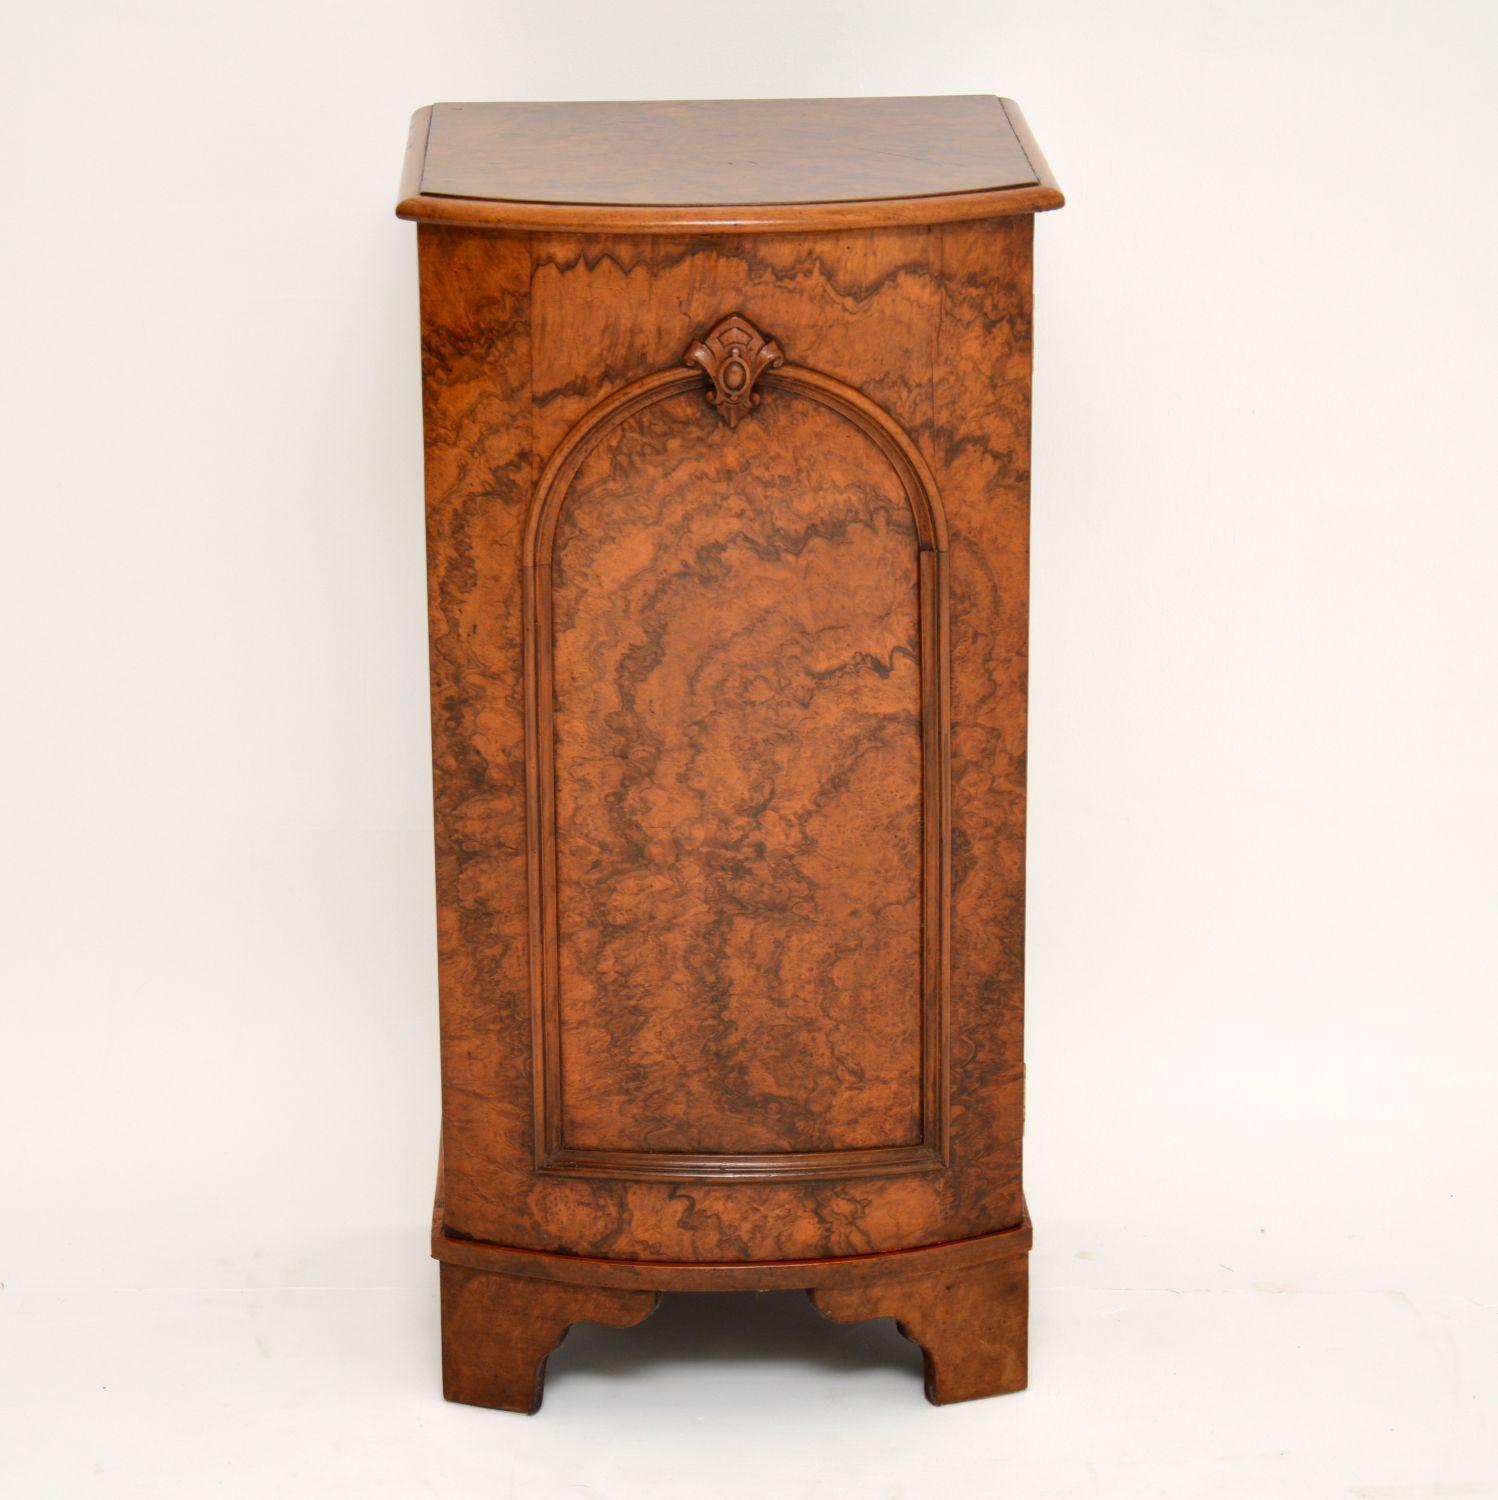 This antique Victorian burr walnut bow fronted cabinet has beautiful figuring throughout & is in excellent condition, dating to around the 1860’s period. This is a very useful & compact piece of furniture, which could be used as a bedside cabinet or